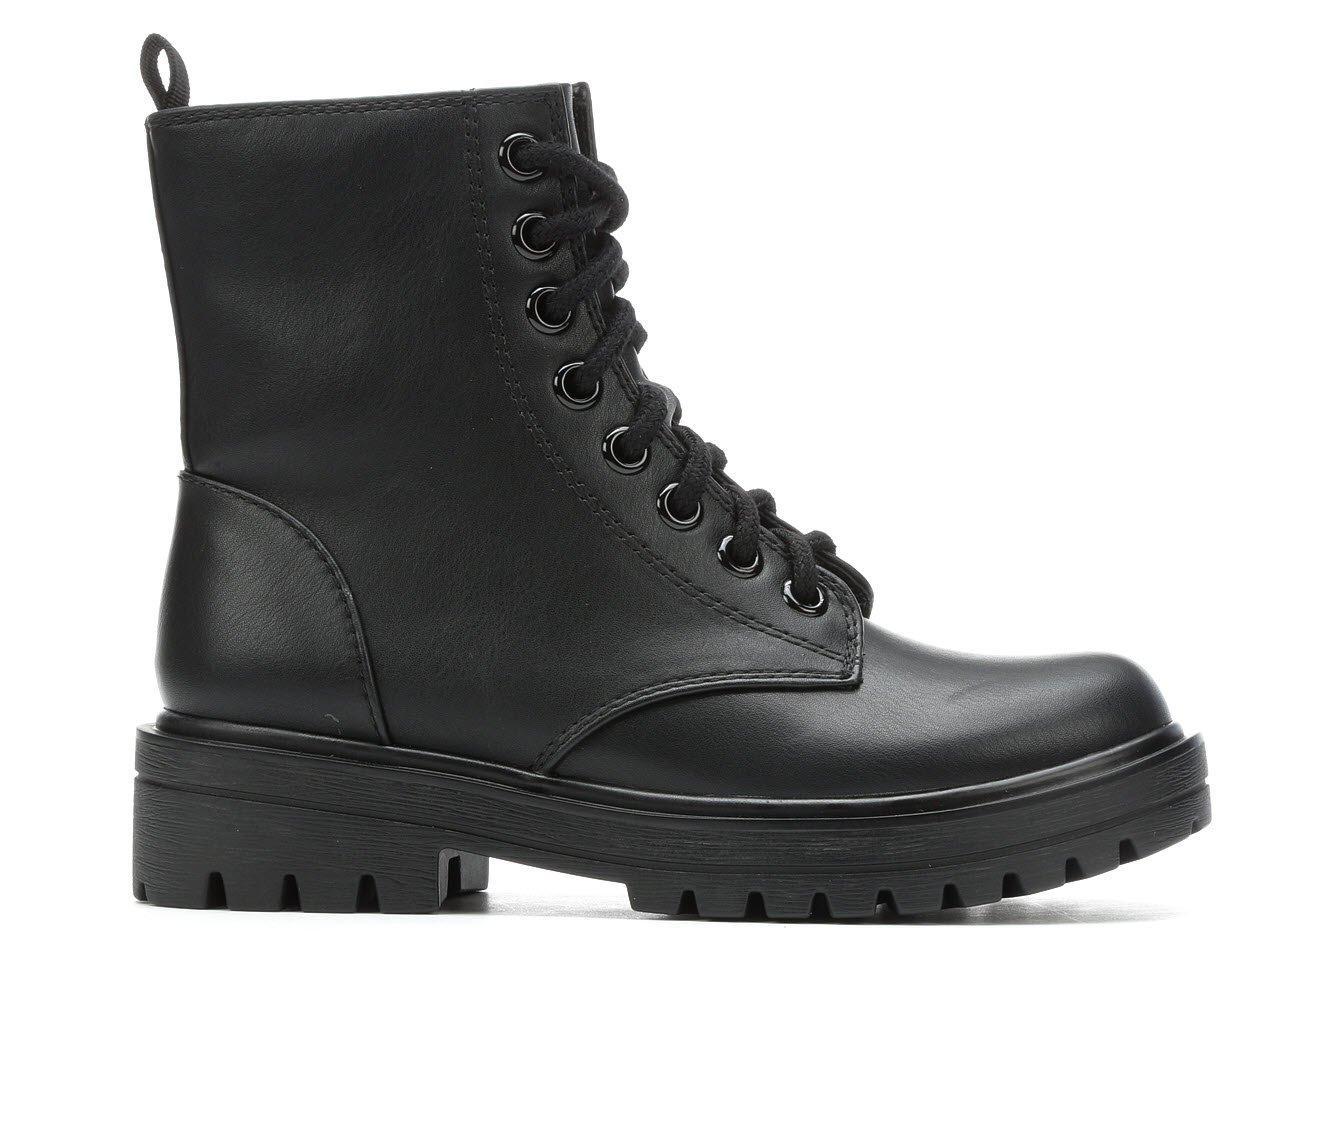 Top Brands for Combat Boots